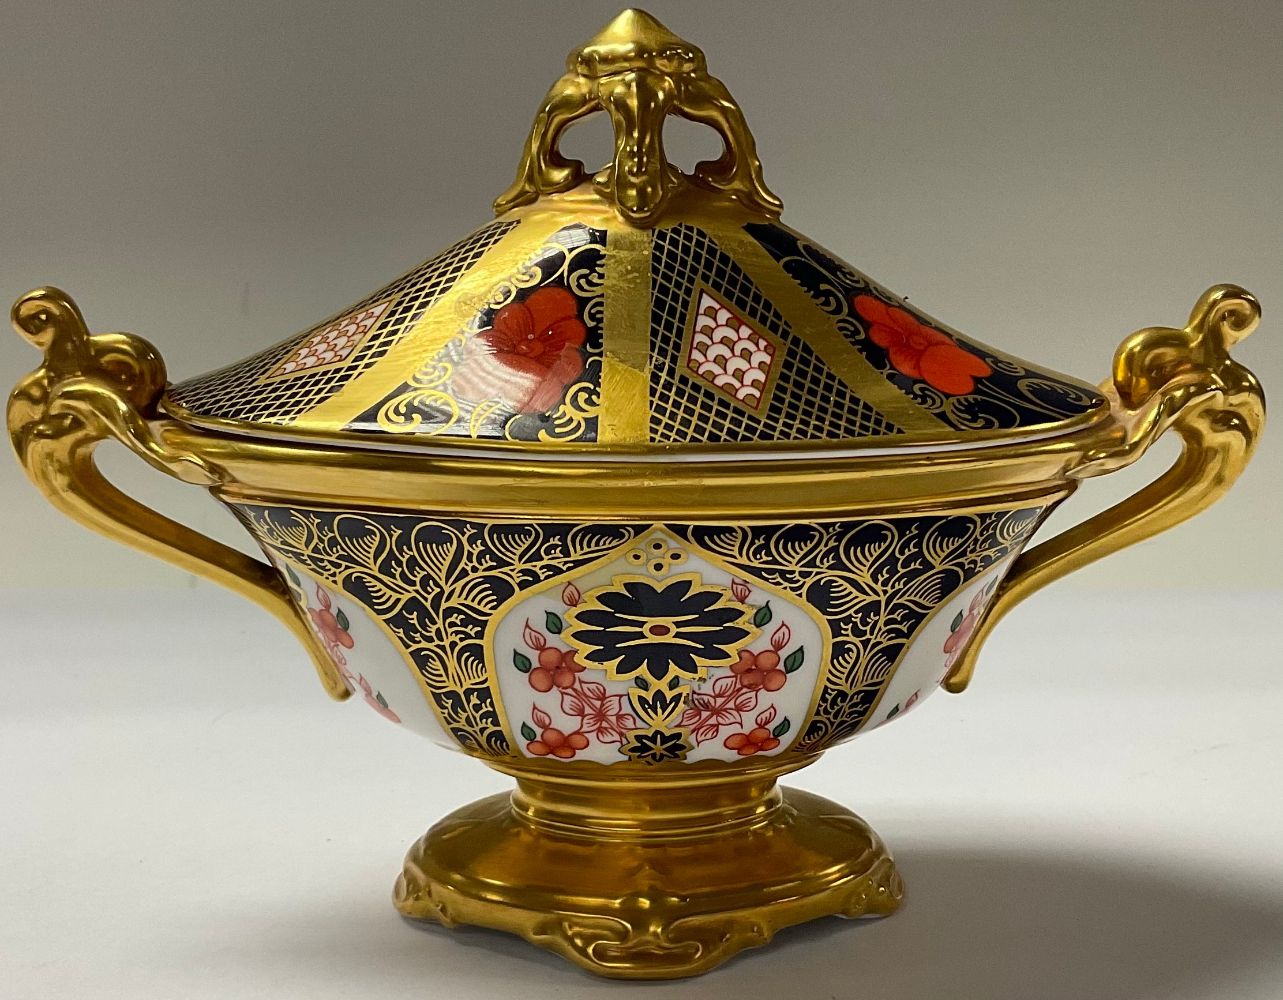 Antiques, Interiors, Estates and Collectables Auction